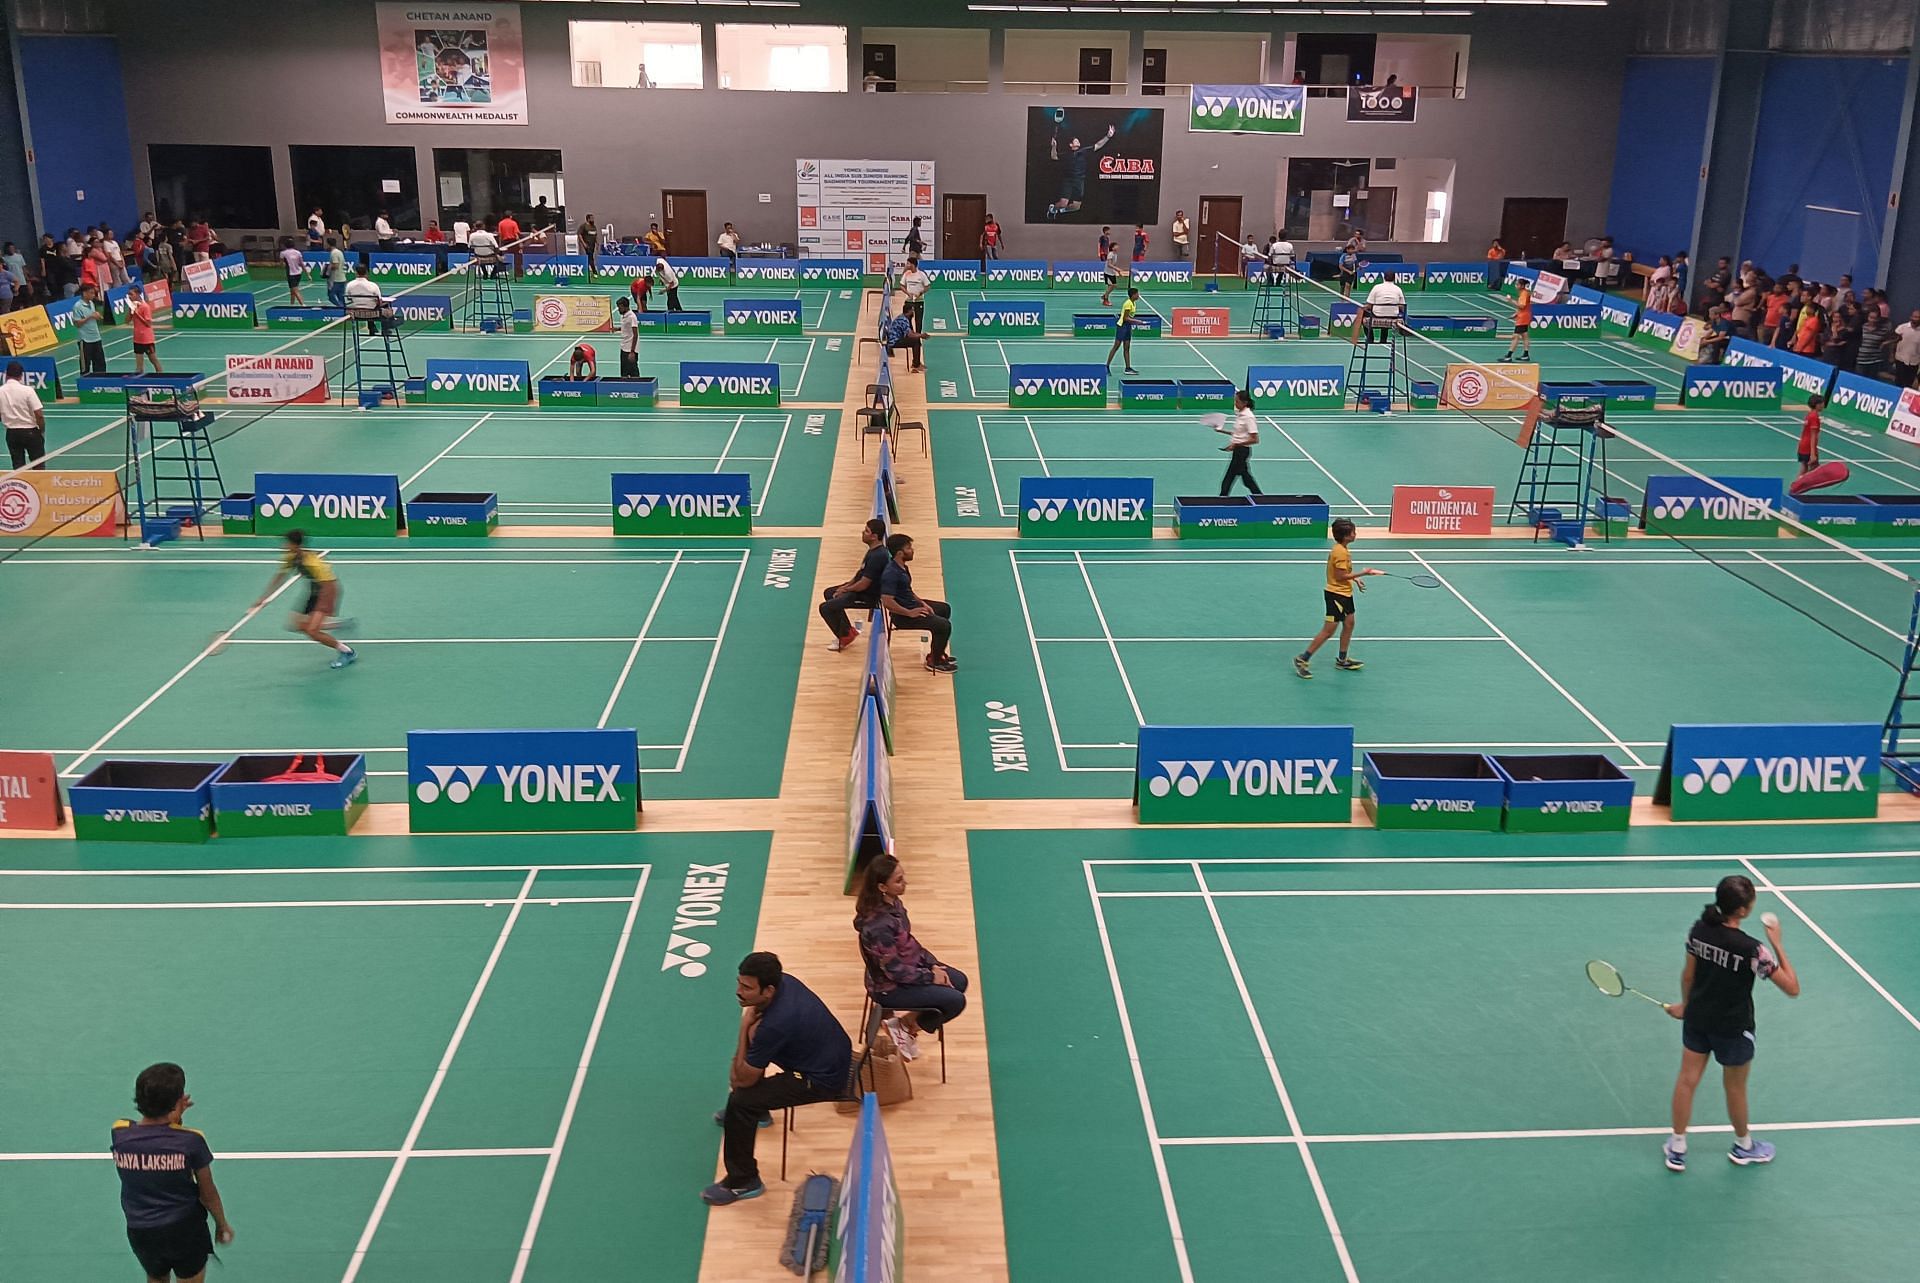 Participants in action during the ongoing Yonex-Sunrise All India Sub Junior Under-13 Ranking Badminton tournament at the Chetan Anand Sports Centre in Hyderabad. (Pic credit: BAI)